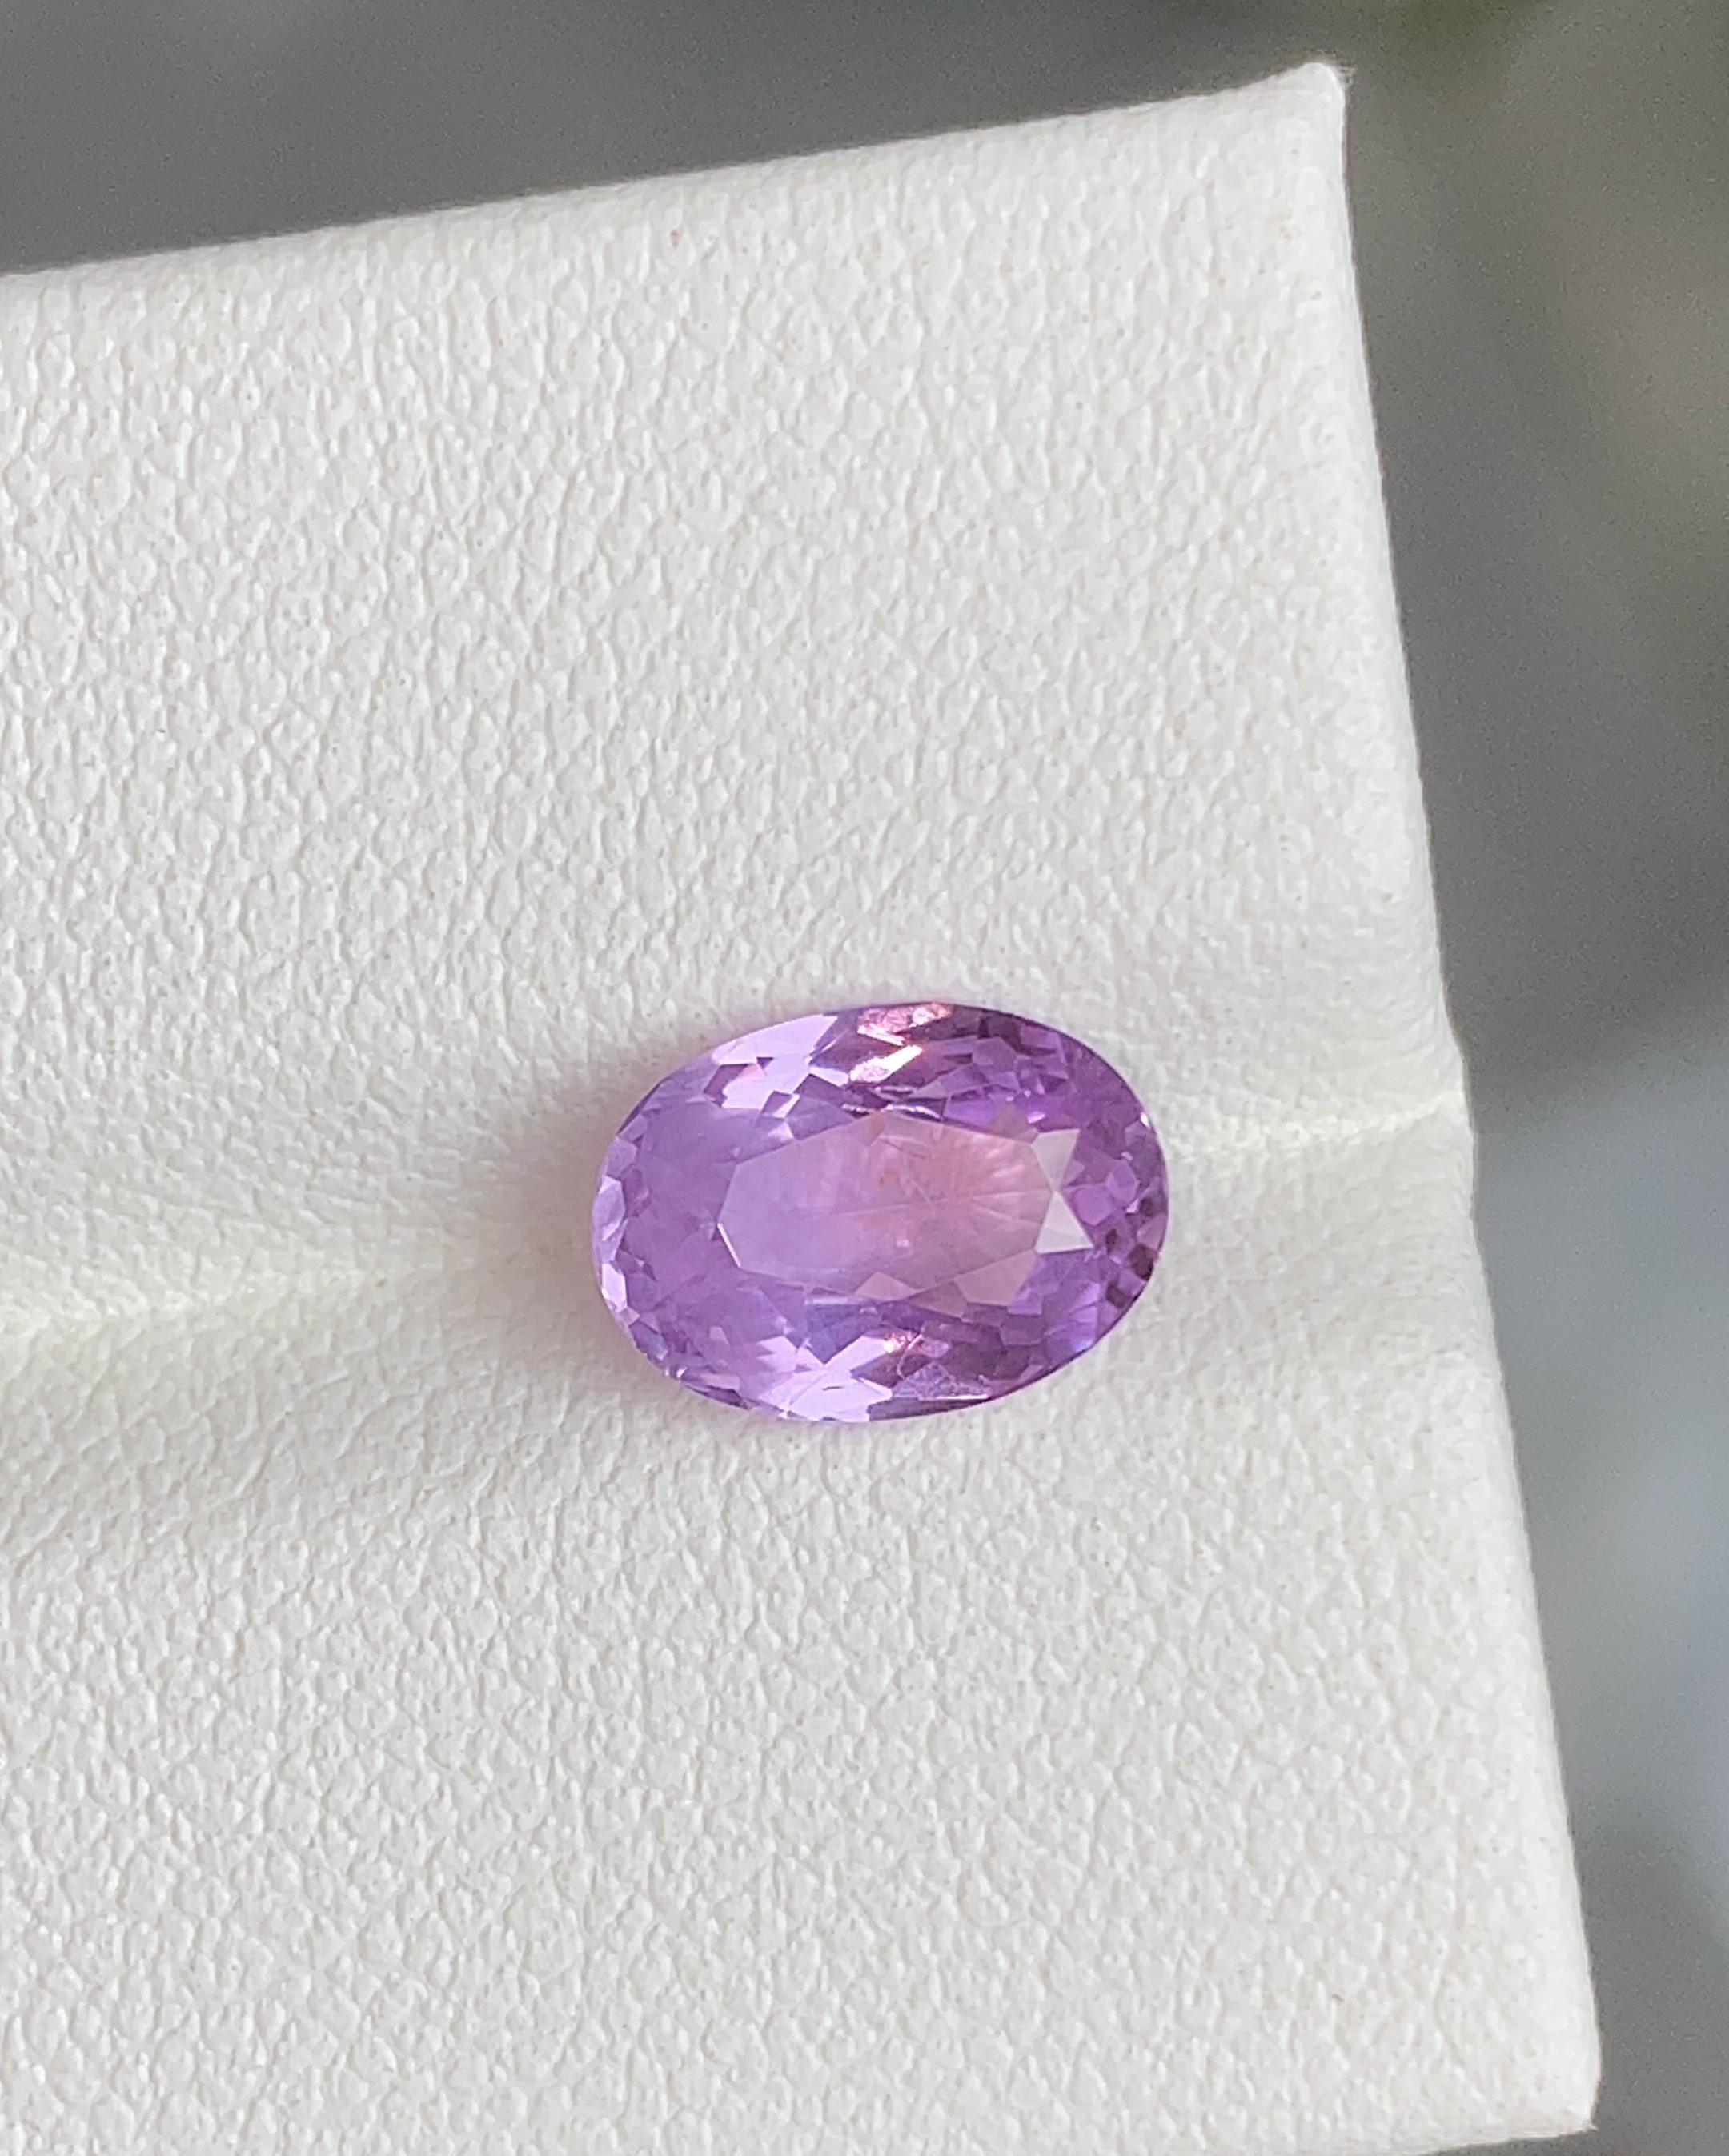 Ceylon Purple sapphire 2.10 Carats unheated comes with pretty purple color and luster and perfect cut, unheated 

• Variety: Sapphire
• Origin: Sri Lanka (Ceylon)
• Color(s): Purple
• Shape/Cutting Style: Oval
• Dimensions: 10.8mm x 7.6mm x 5.8mm
•